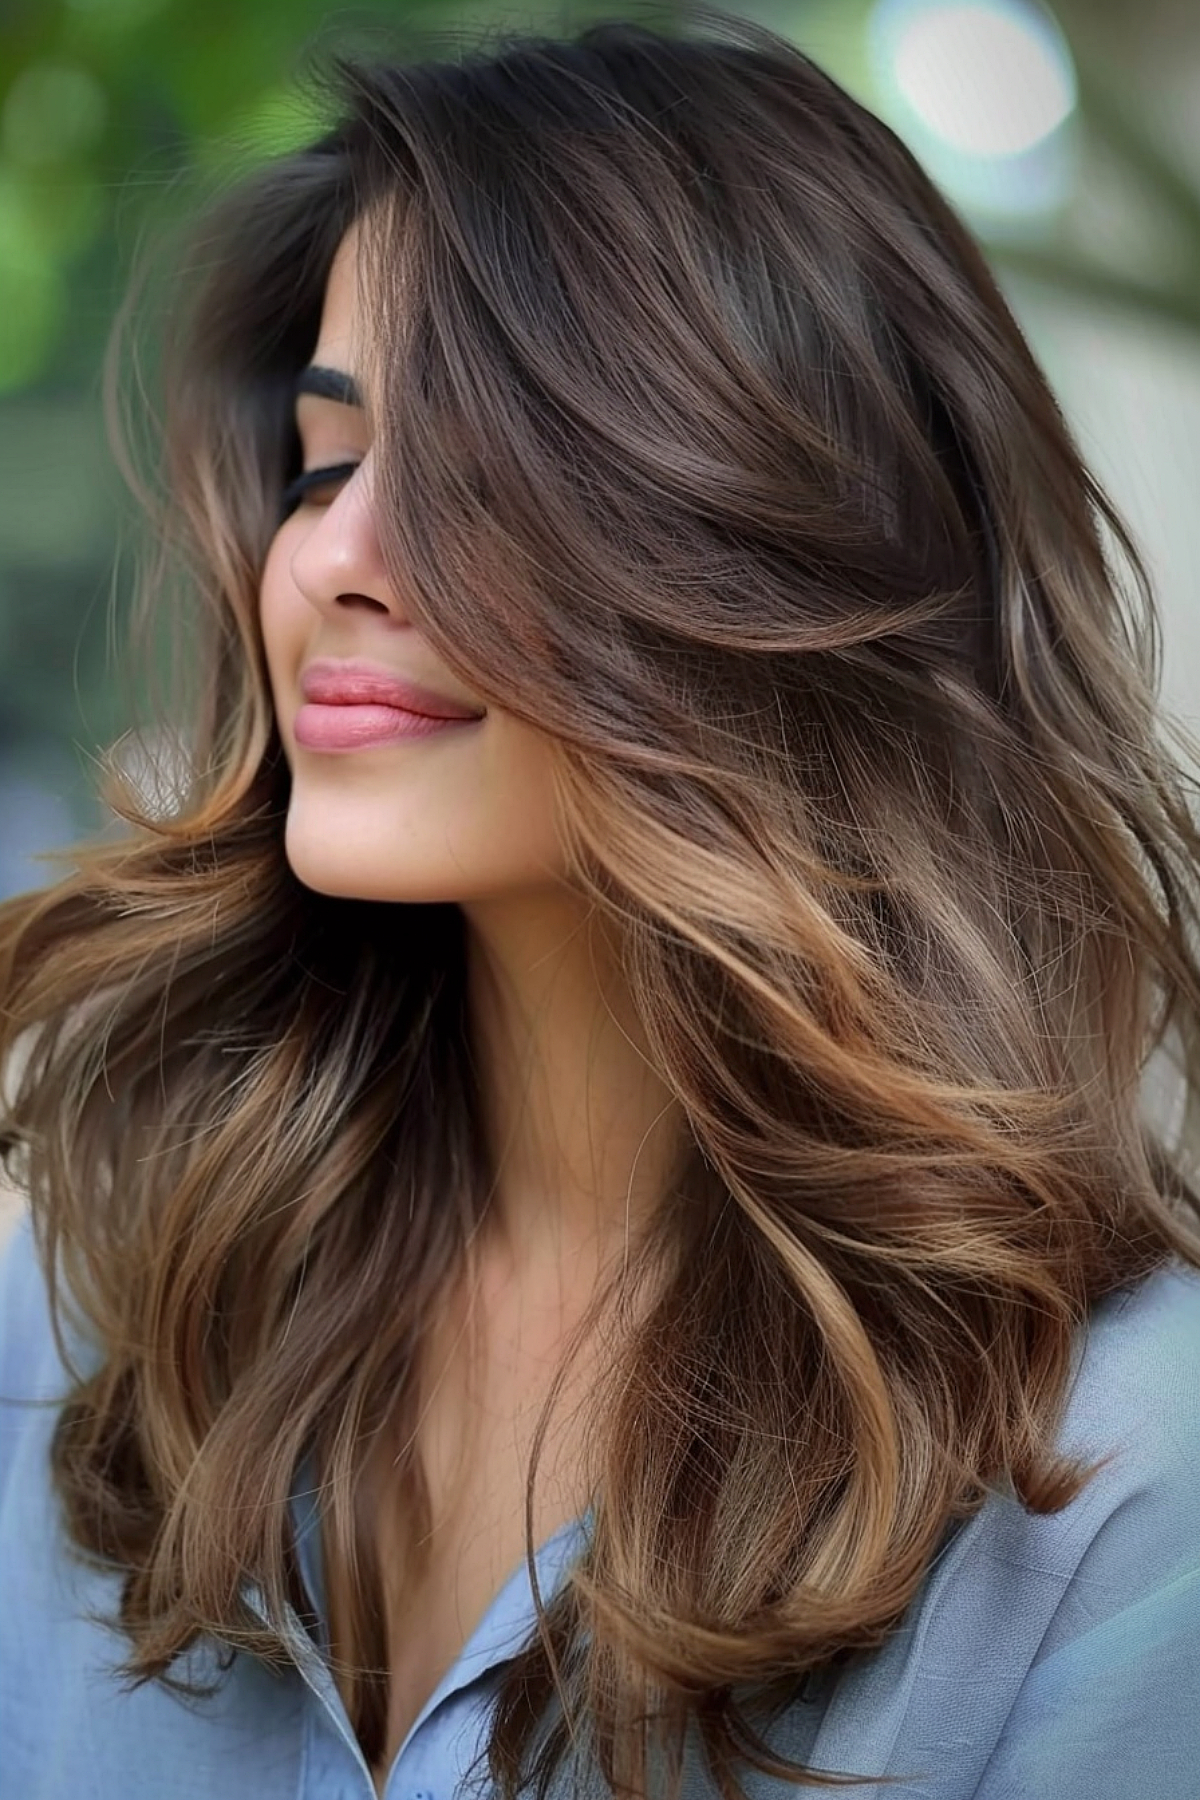 Medium length layered hairstyle with curtain bangs and subtle balayage highlights.